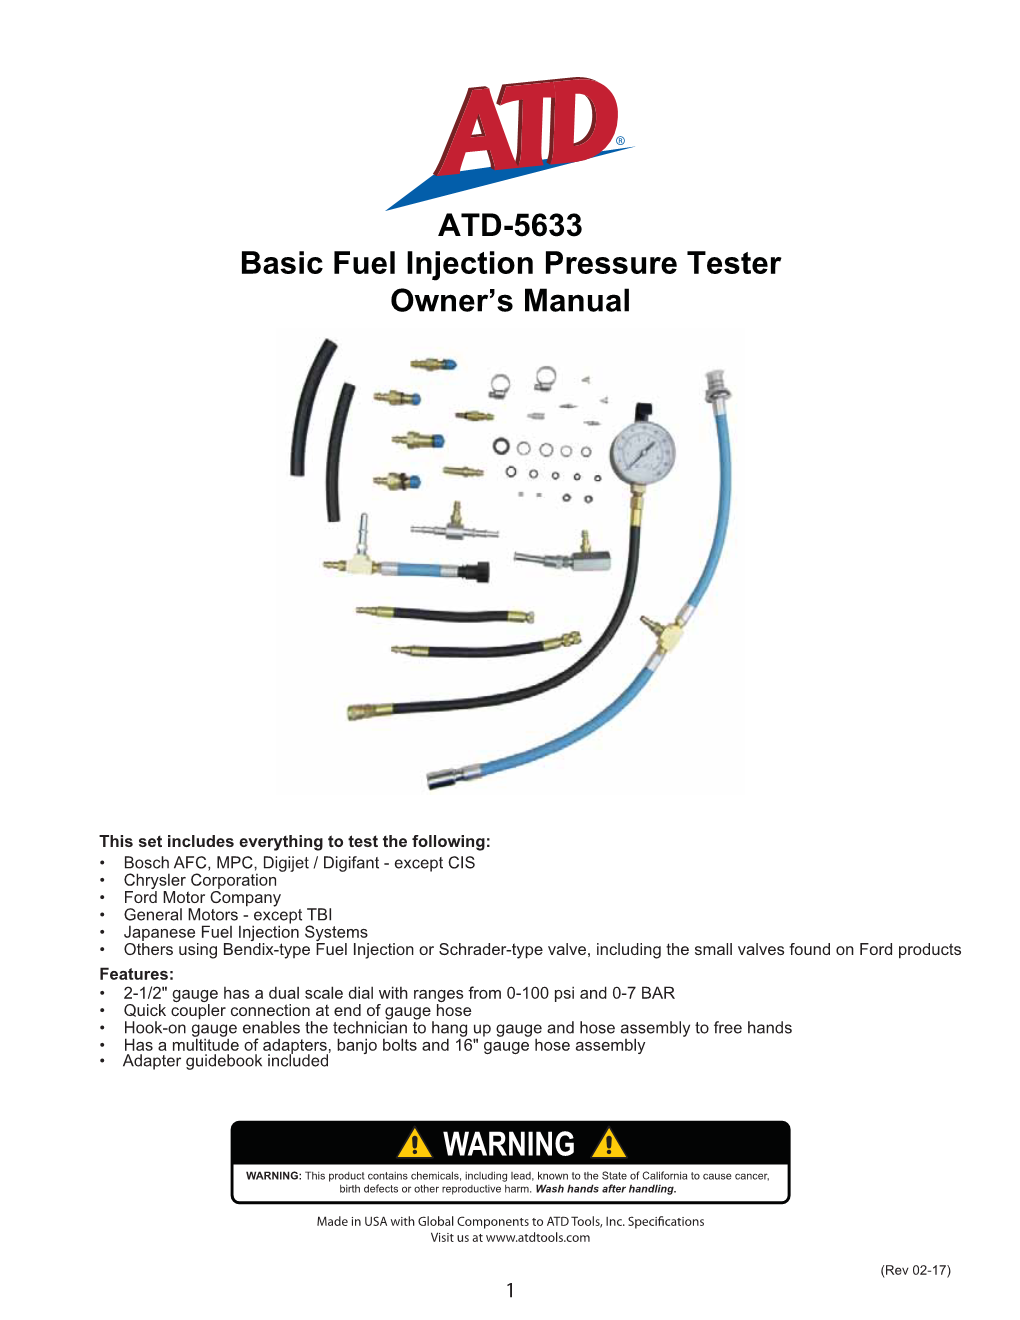 ATD-5633 Basic Fuel Injection Pressure Tester Owner's Manual